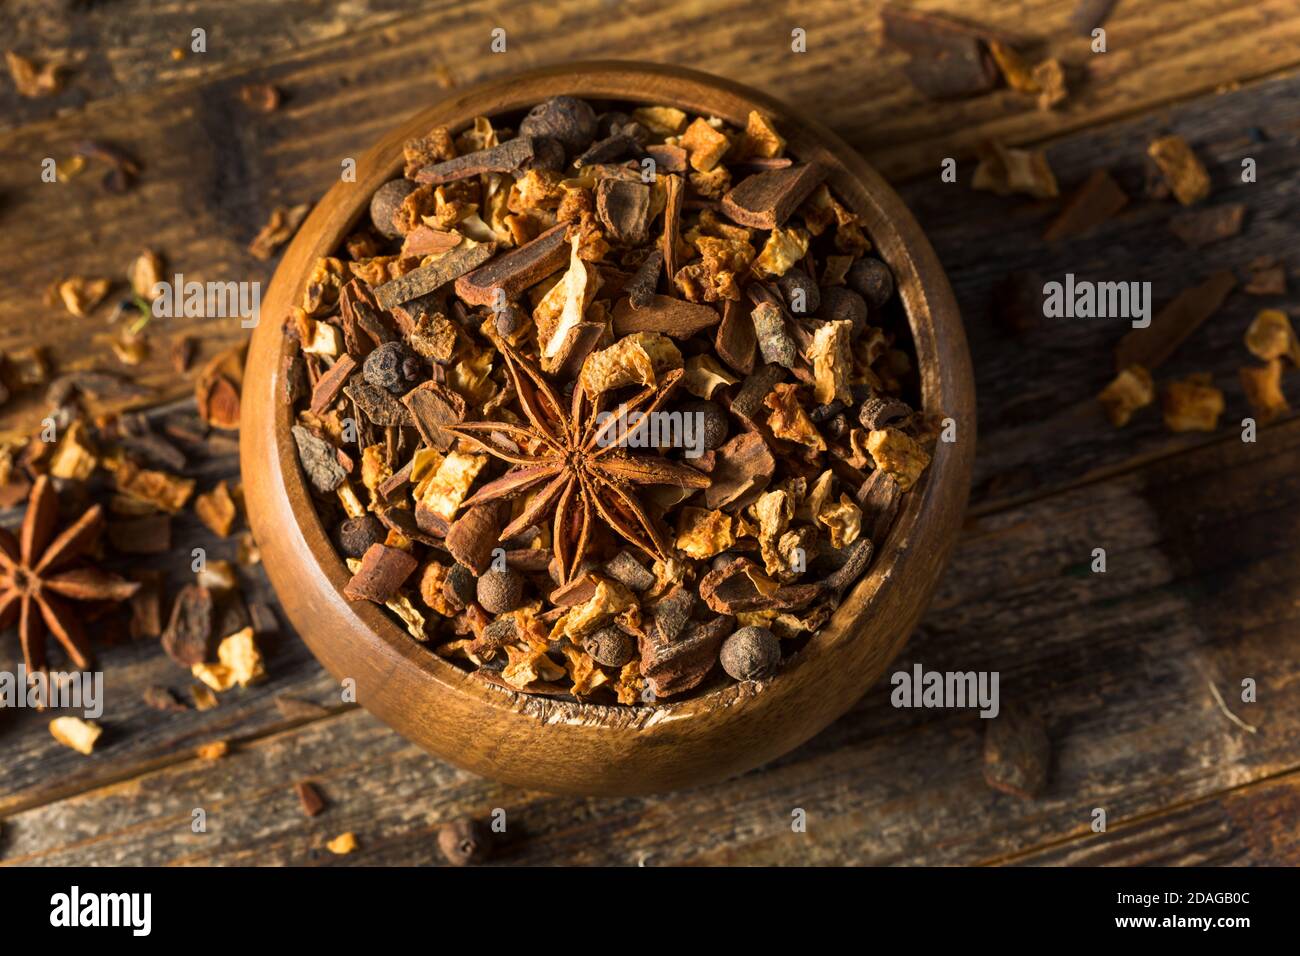 Dry Organic Mulling Spices in a Bowl for Mulled Wine Stock Photo